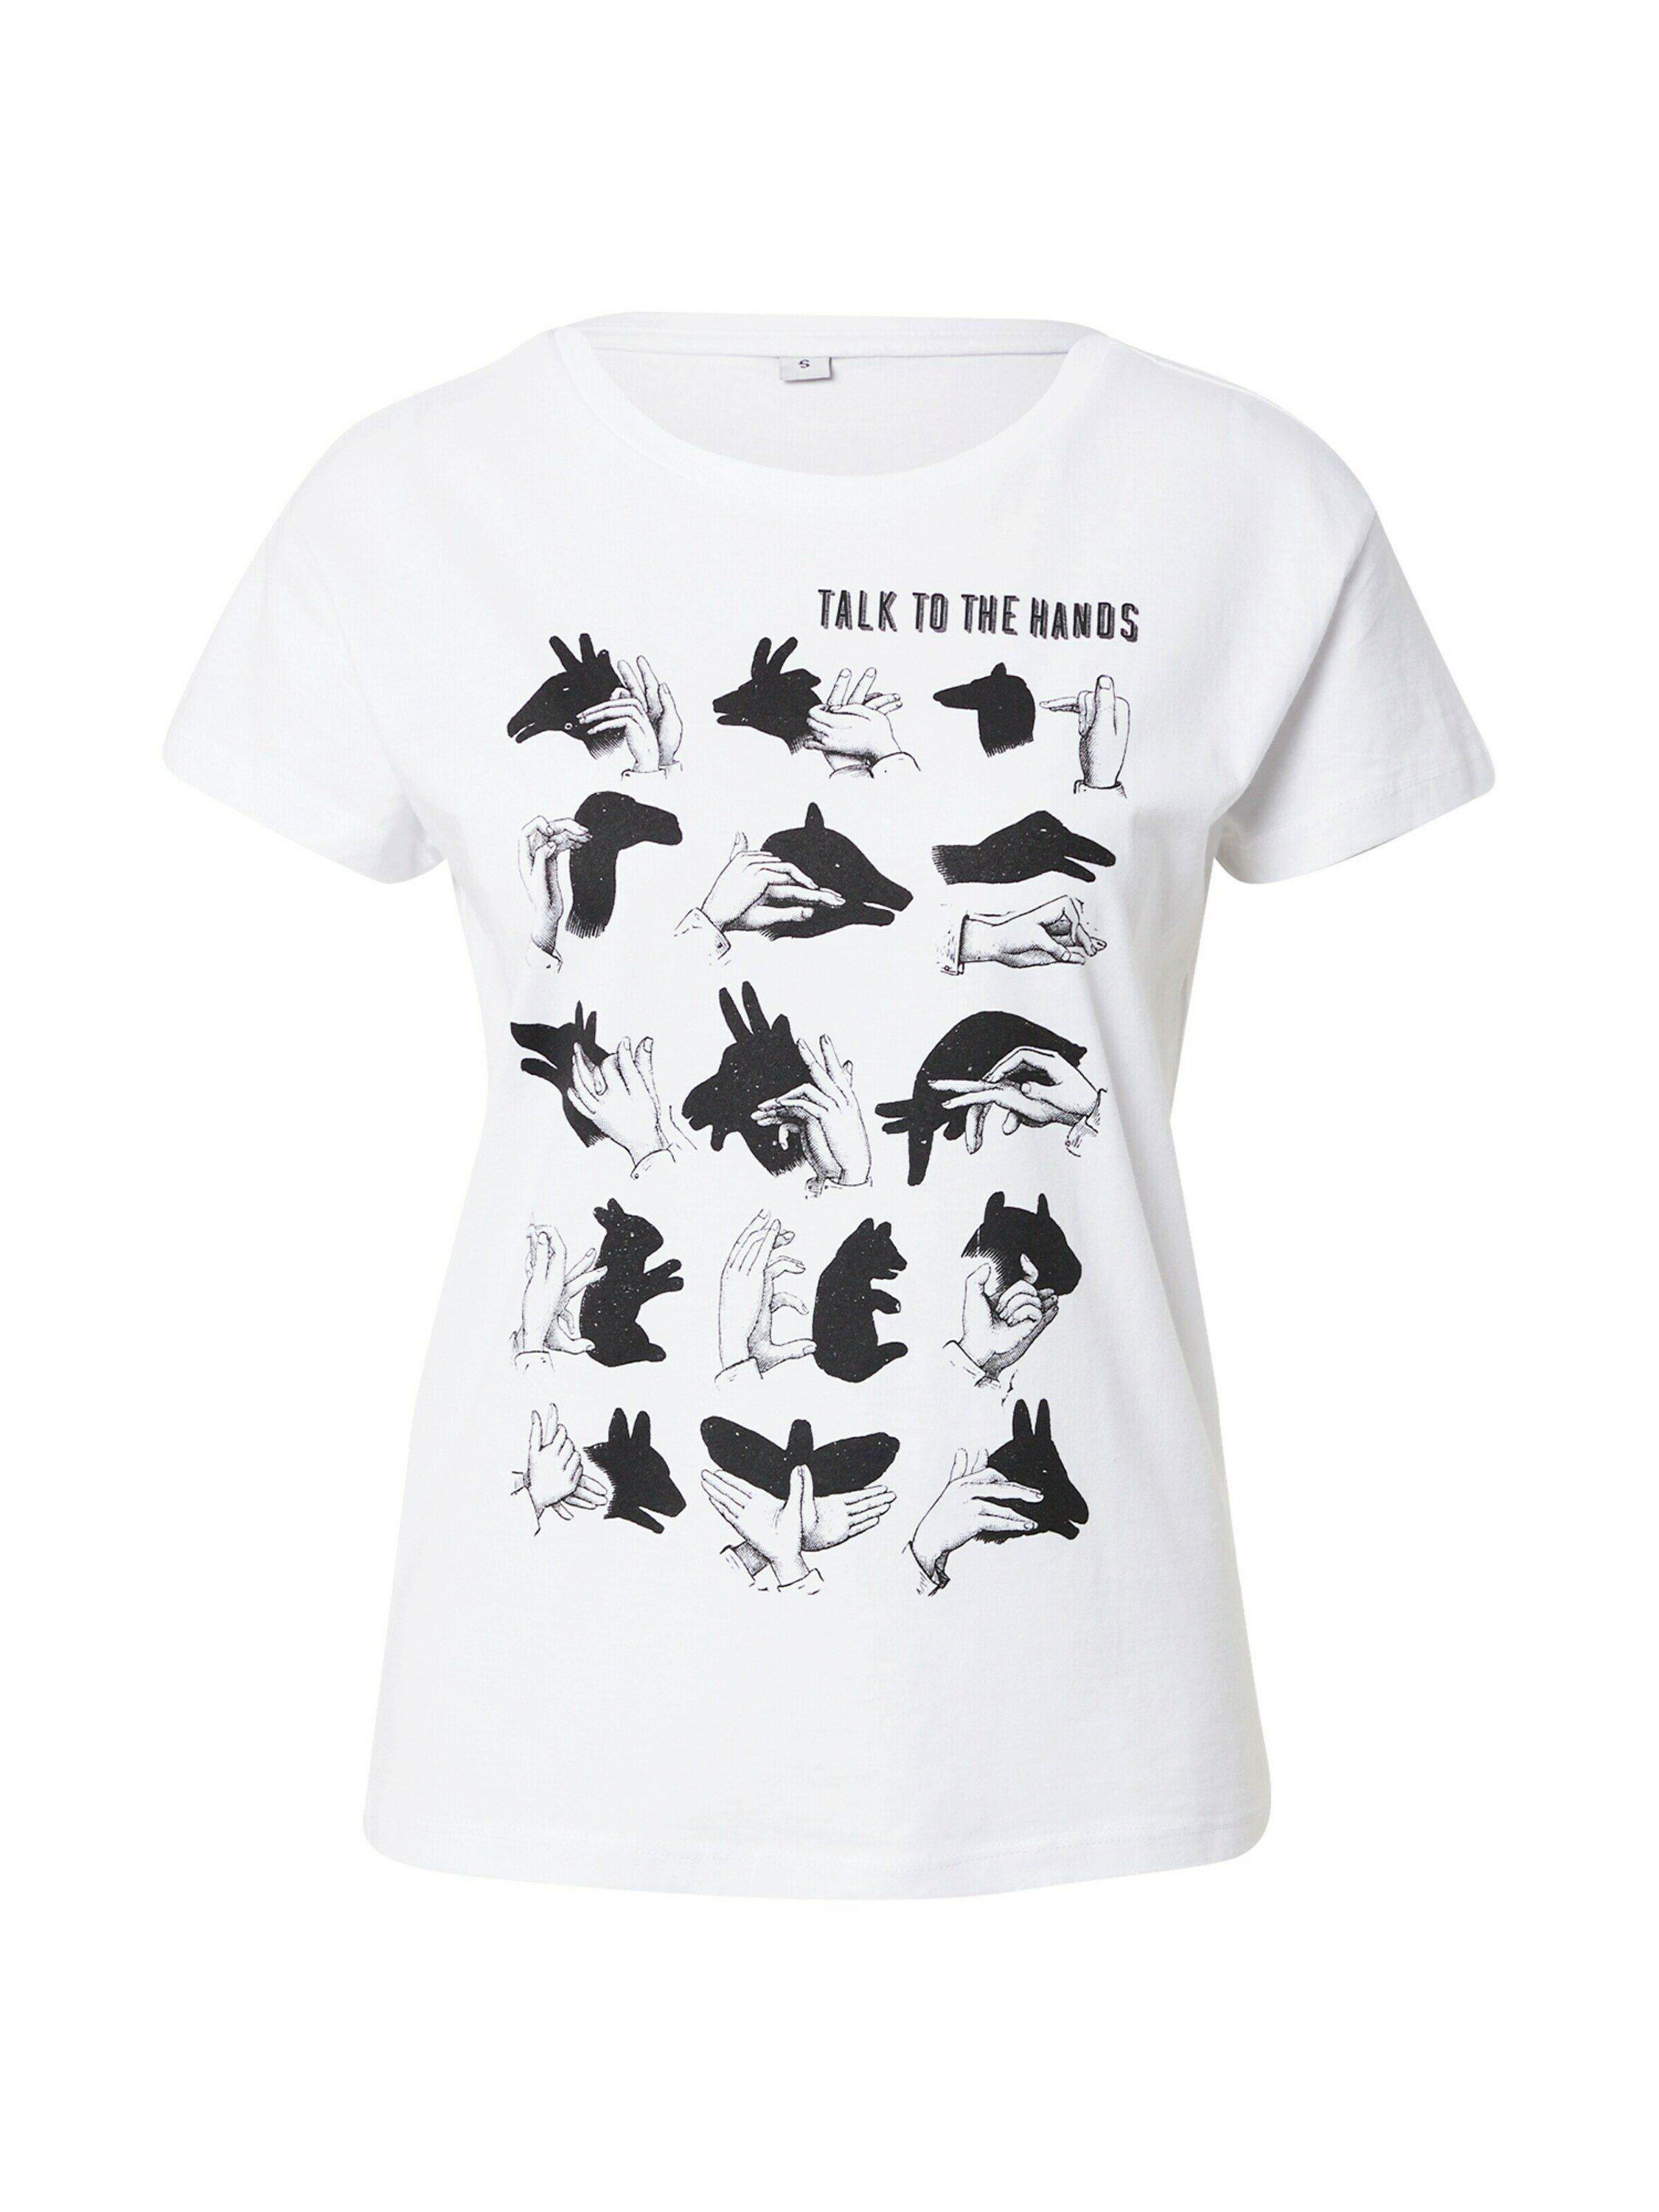 Mister Tee Merchcode To The Talk (1-tlg) Details white To Plain/ohne Talk T-Shirt MT737 Hand Hand The